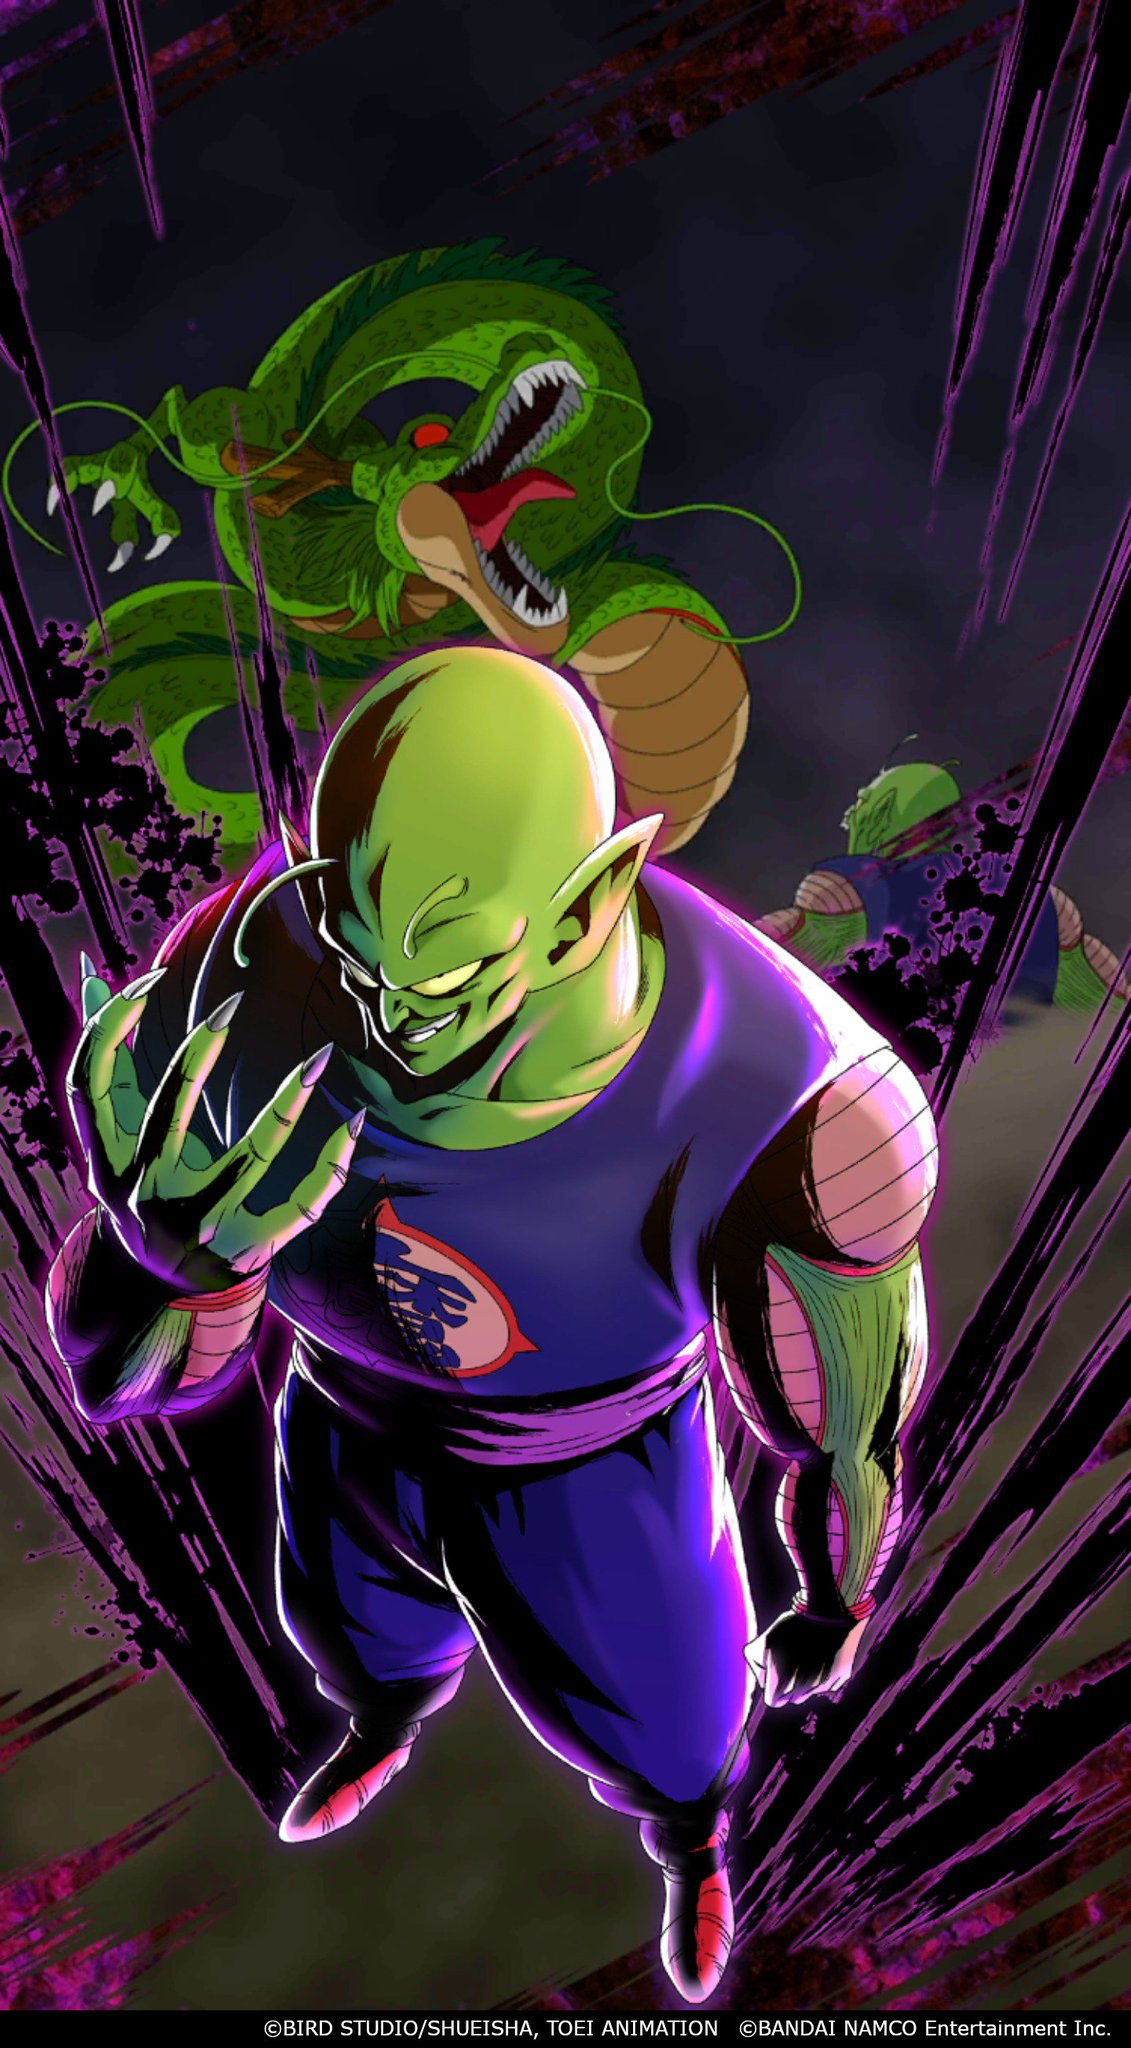 DRAGON BALL LEGENDS - [Balance Notes] <EX Demon King Piccolo (PUR)> ・Overall stat buff ・Z Ability PUR buff strength will be increased from Limit Break 5 on ・New Unique Ability [Team (